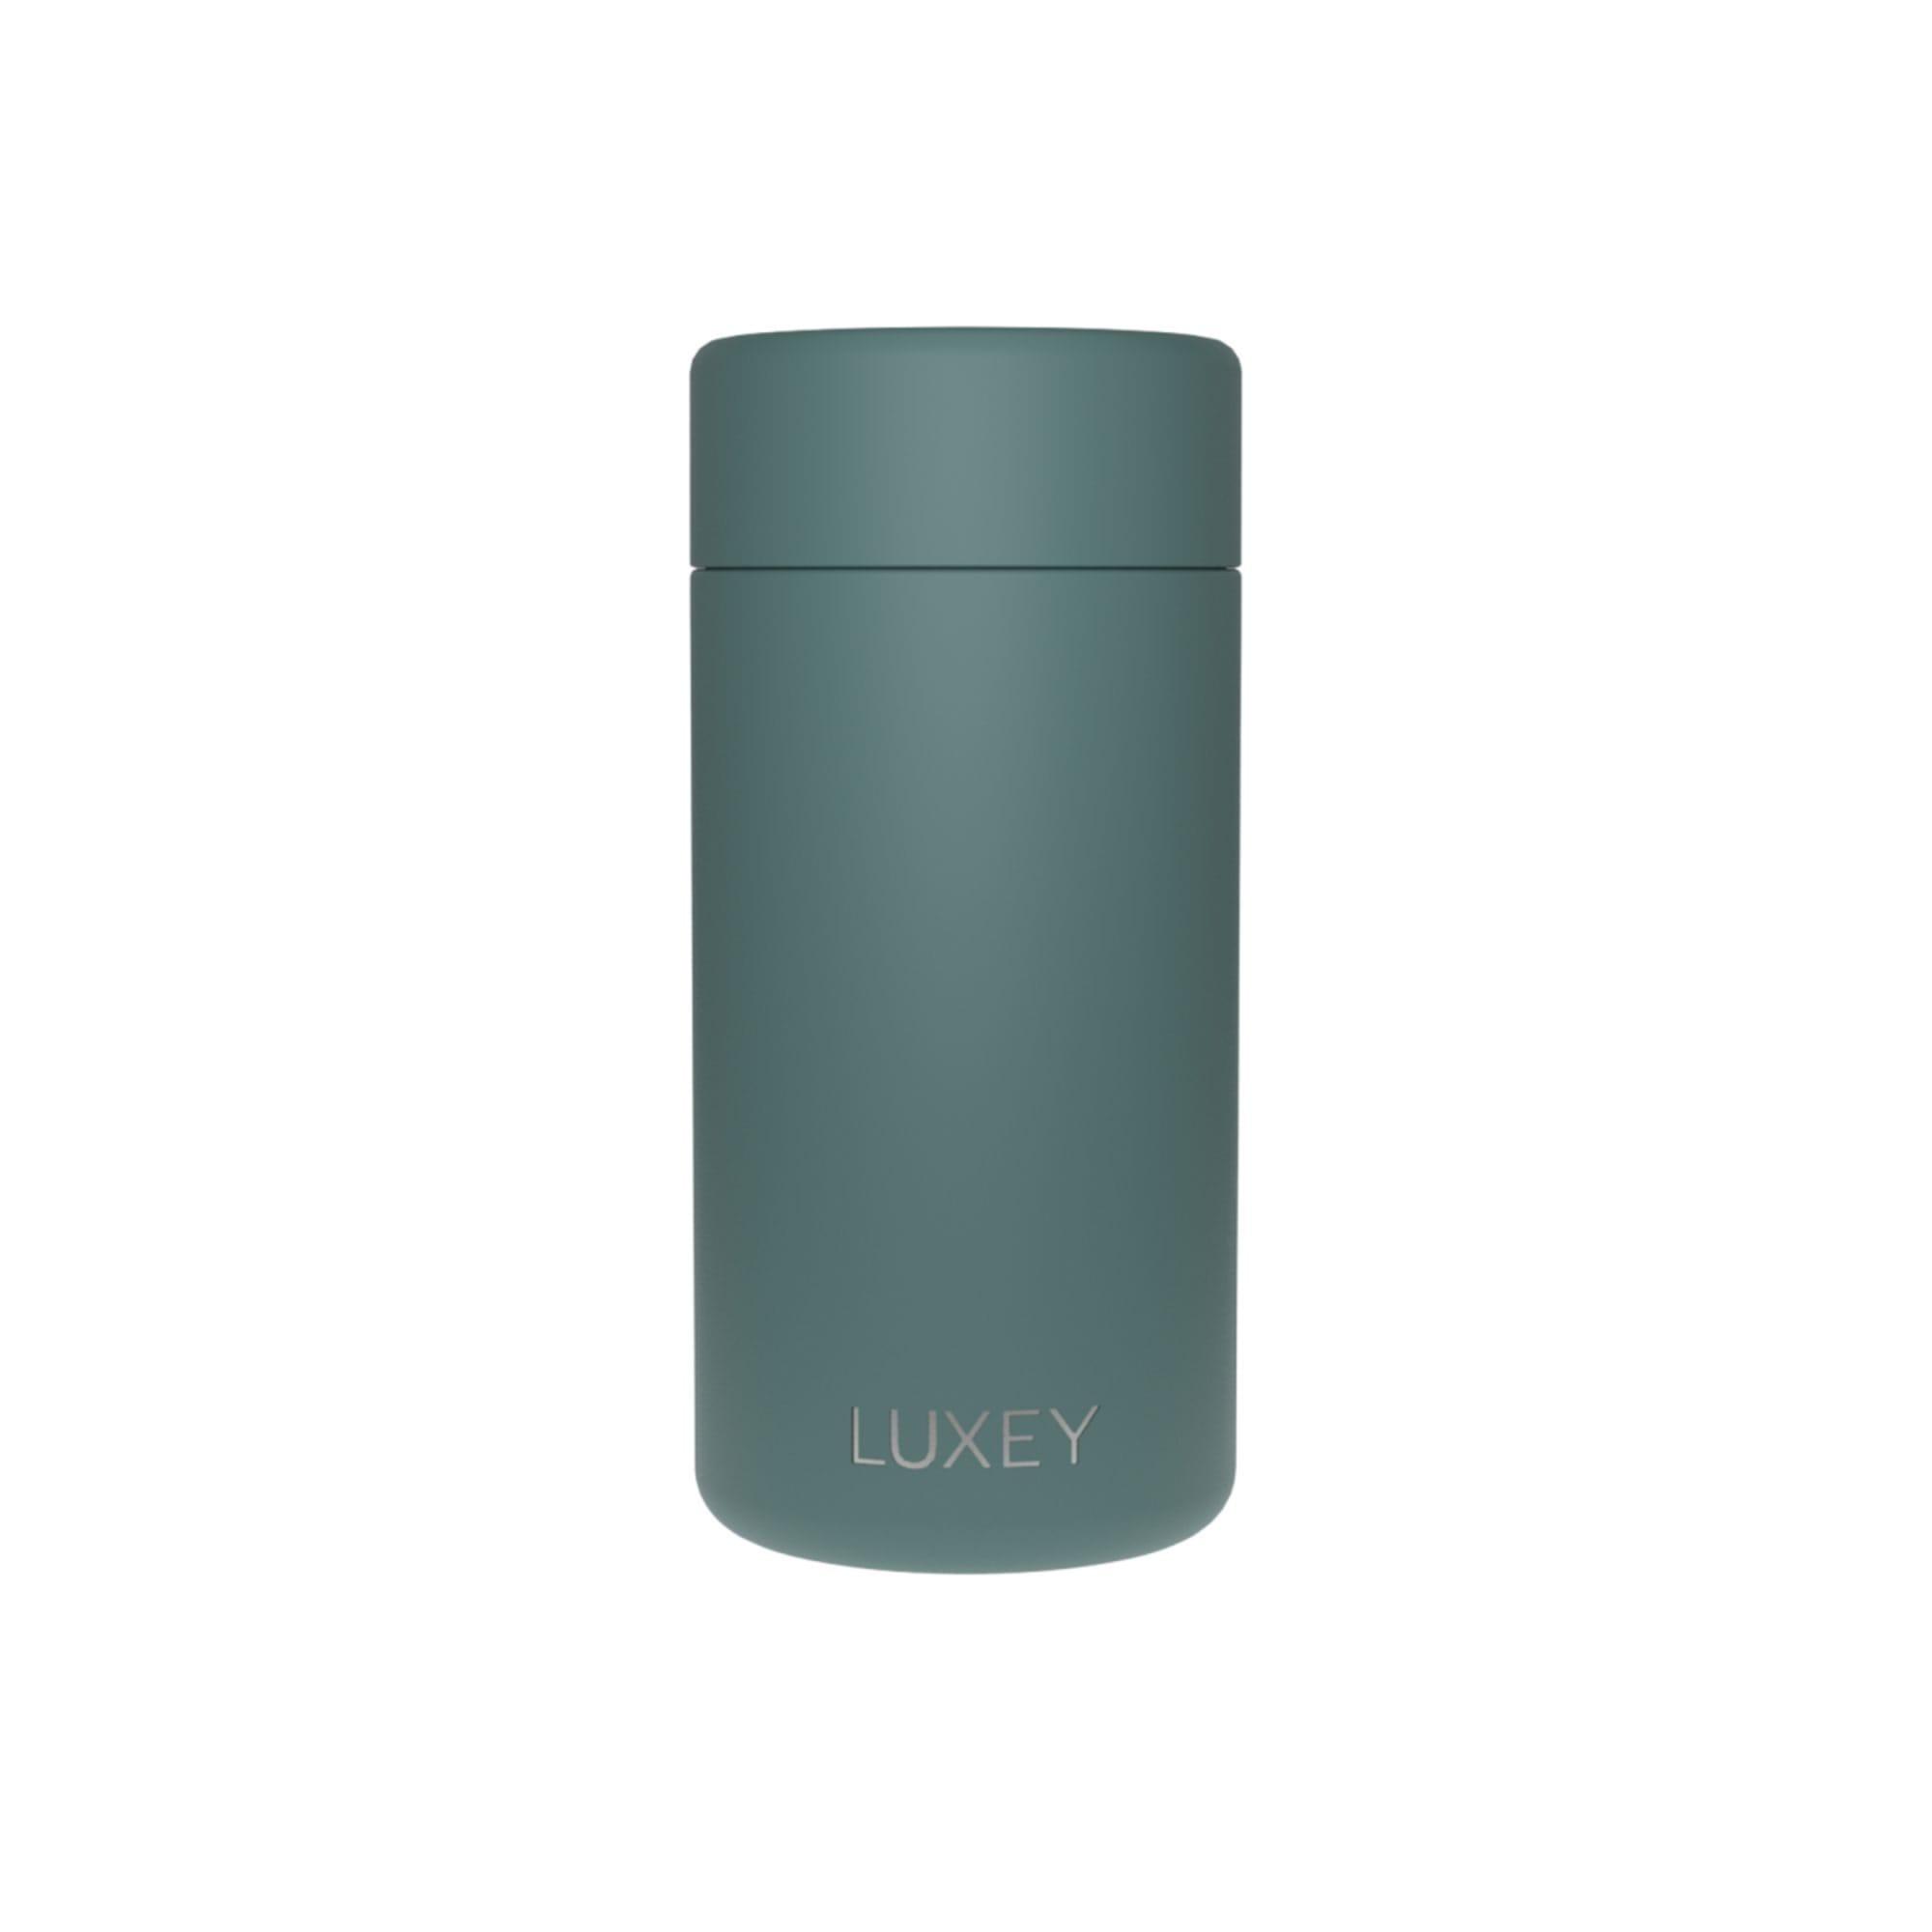 Luxey Cup Original Stainless Steel Cup 355ml (12oz) Kale Image 1